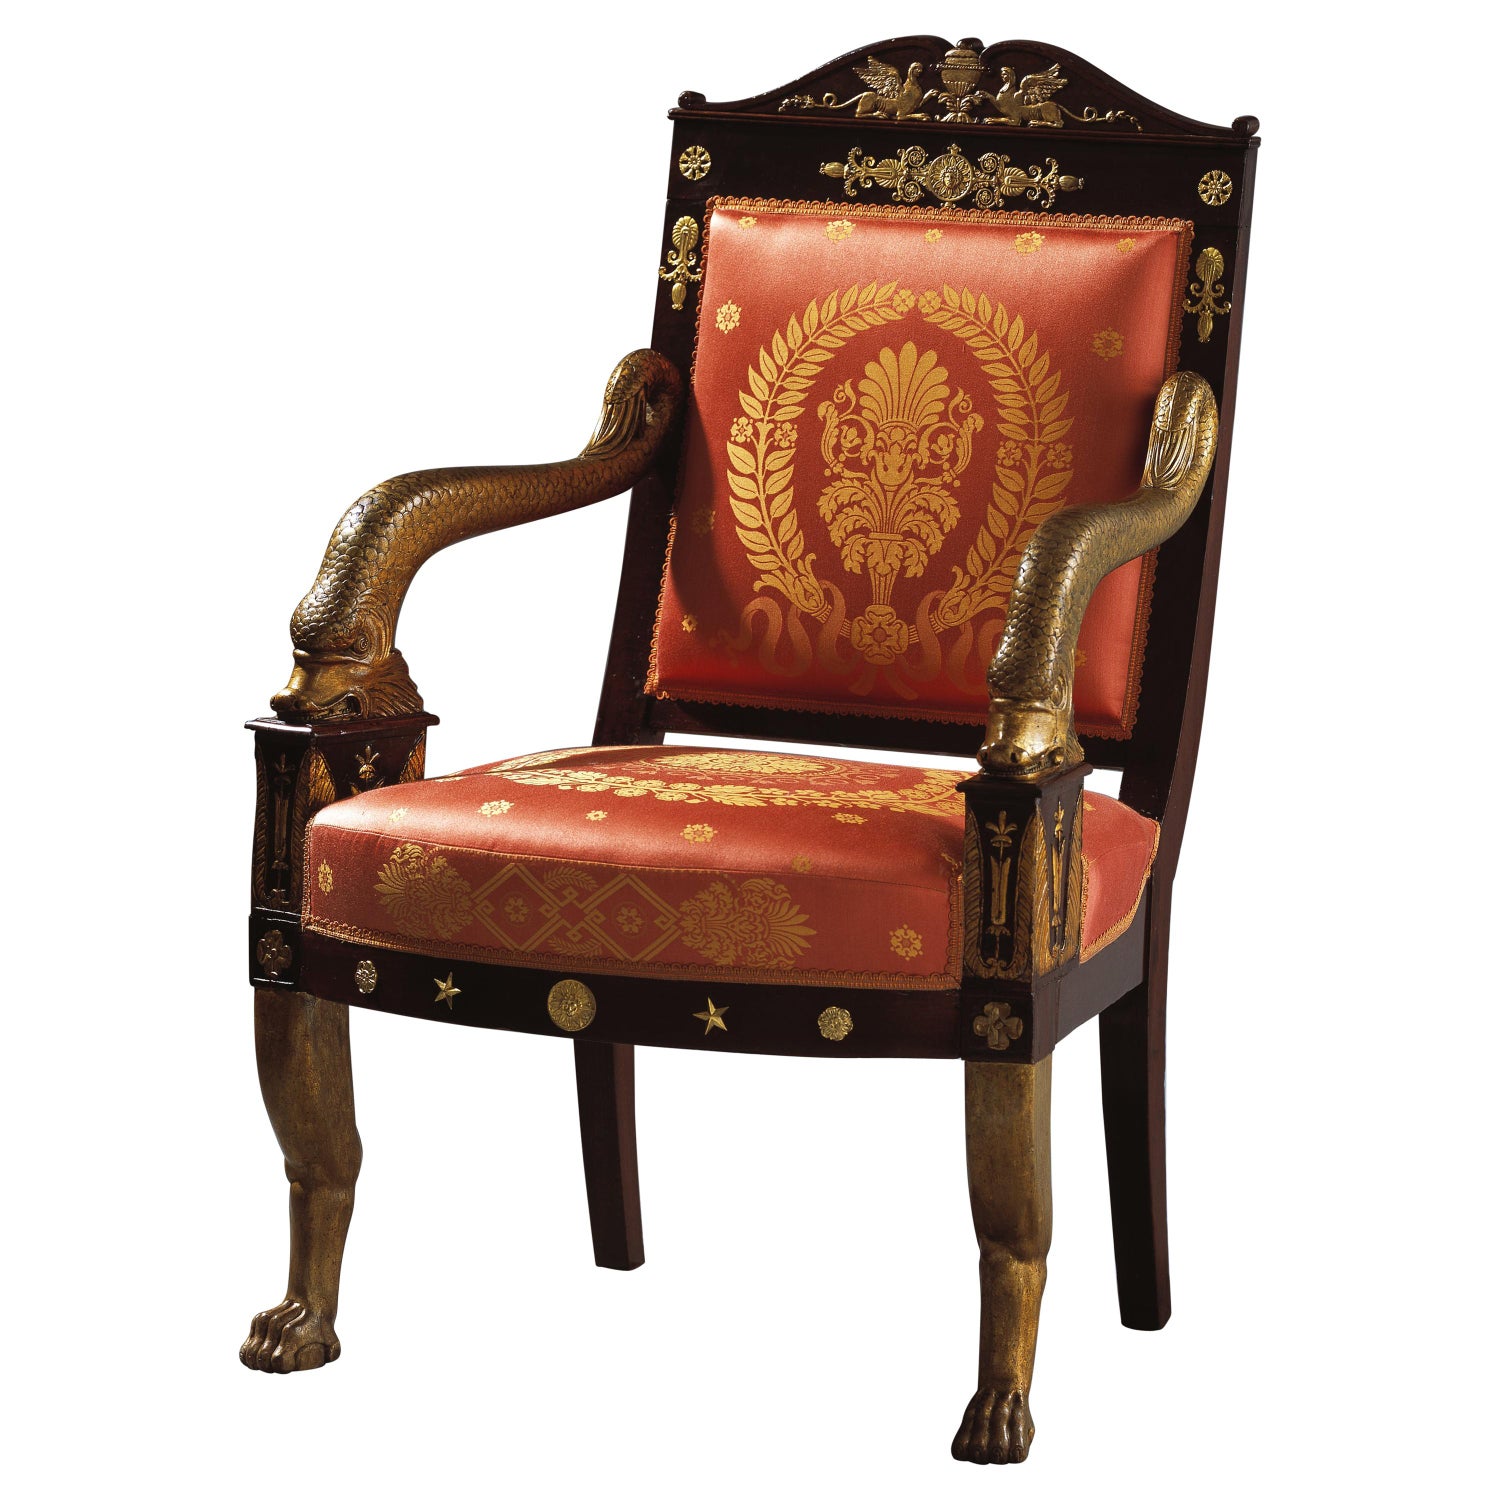 A pet armchair by Jacob, Empire, early 19th century - Ref.97335